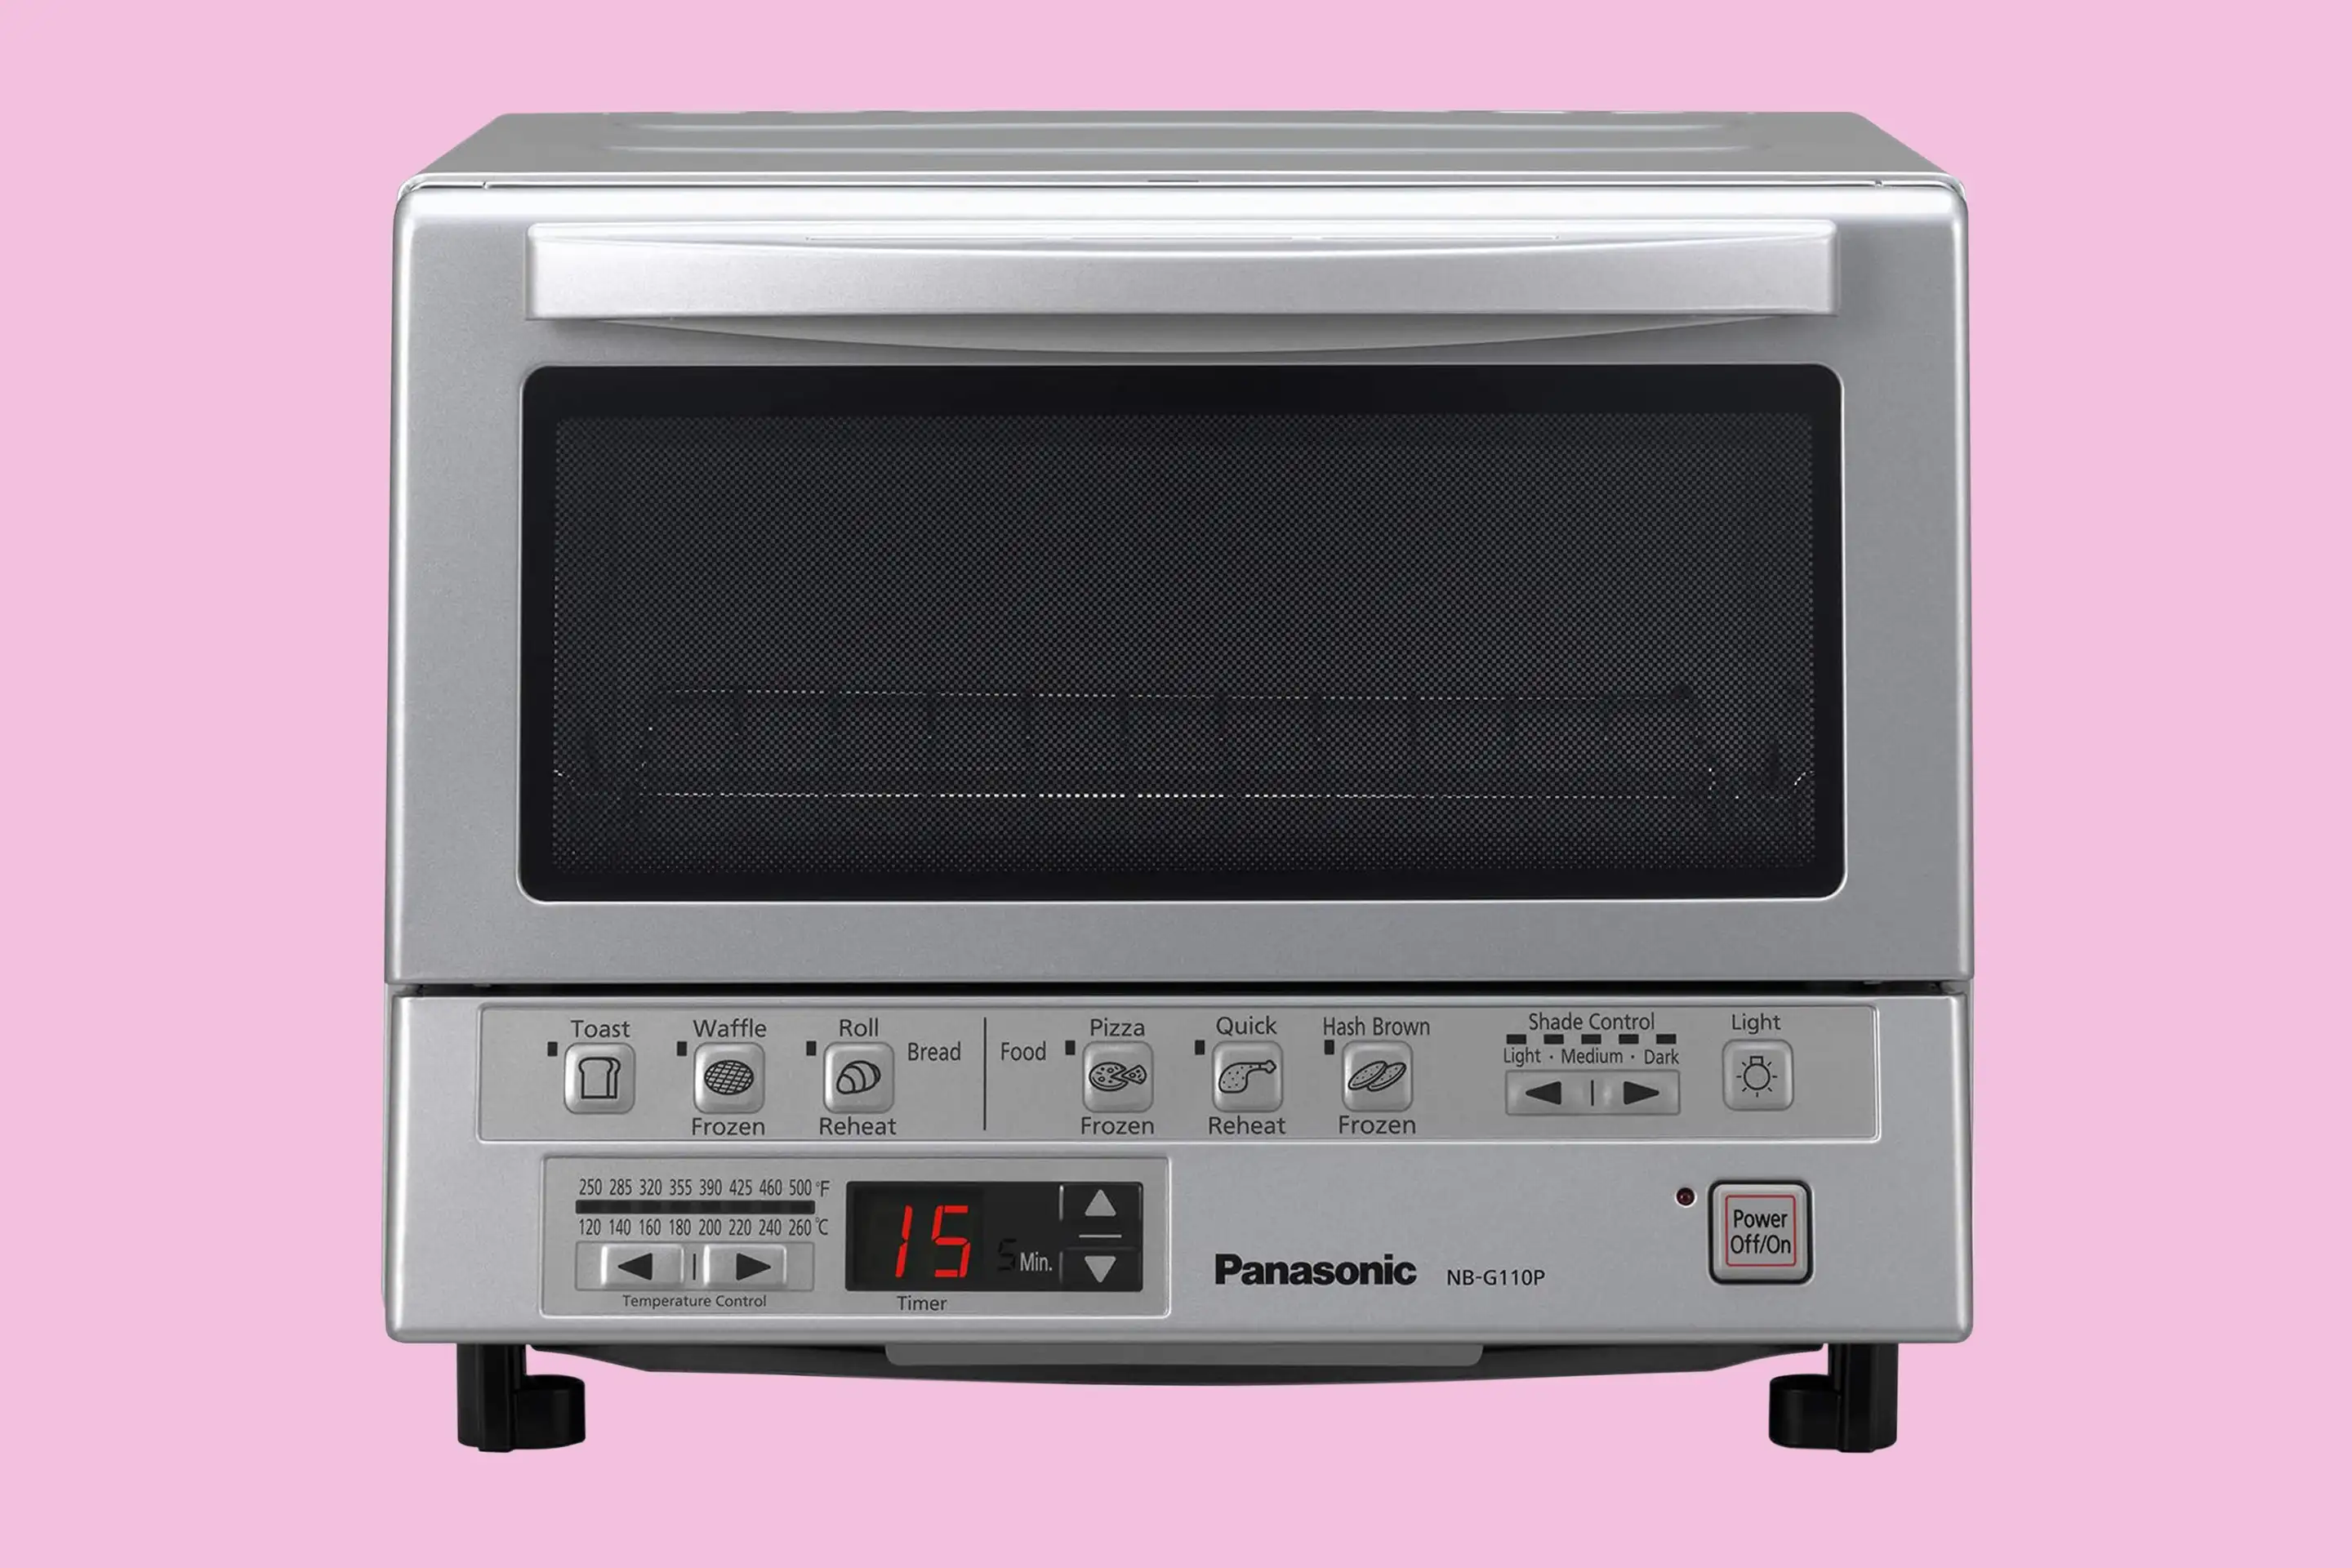 Panasonic FlashXpress Compact Toster Oven